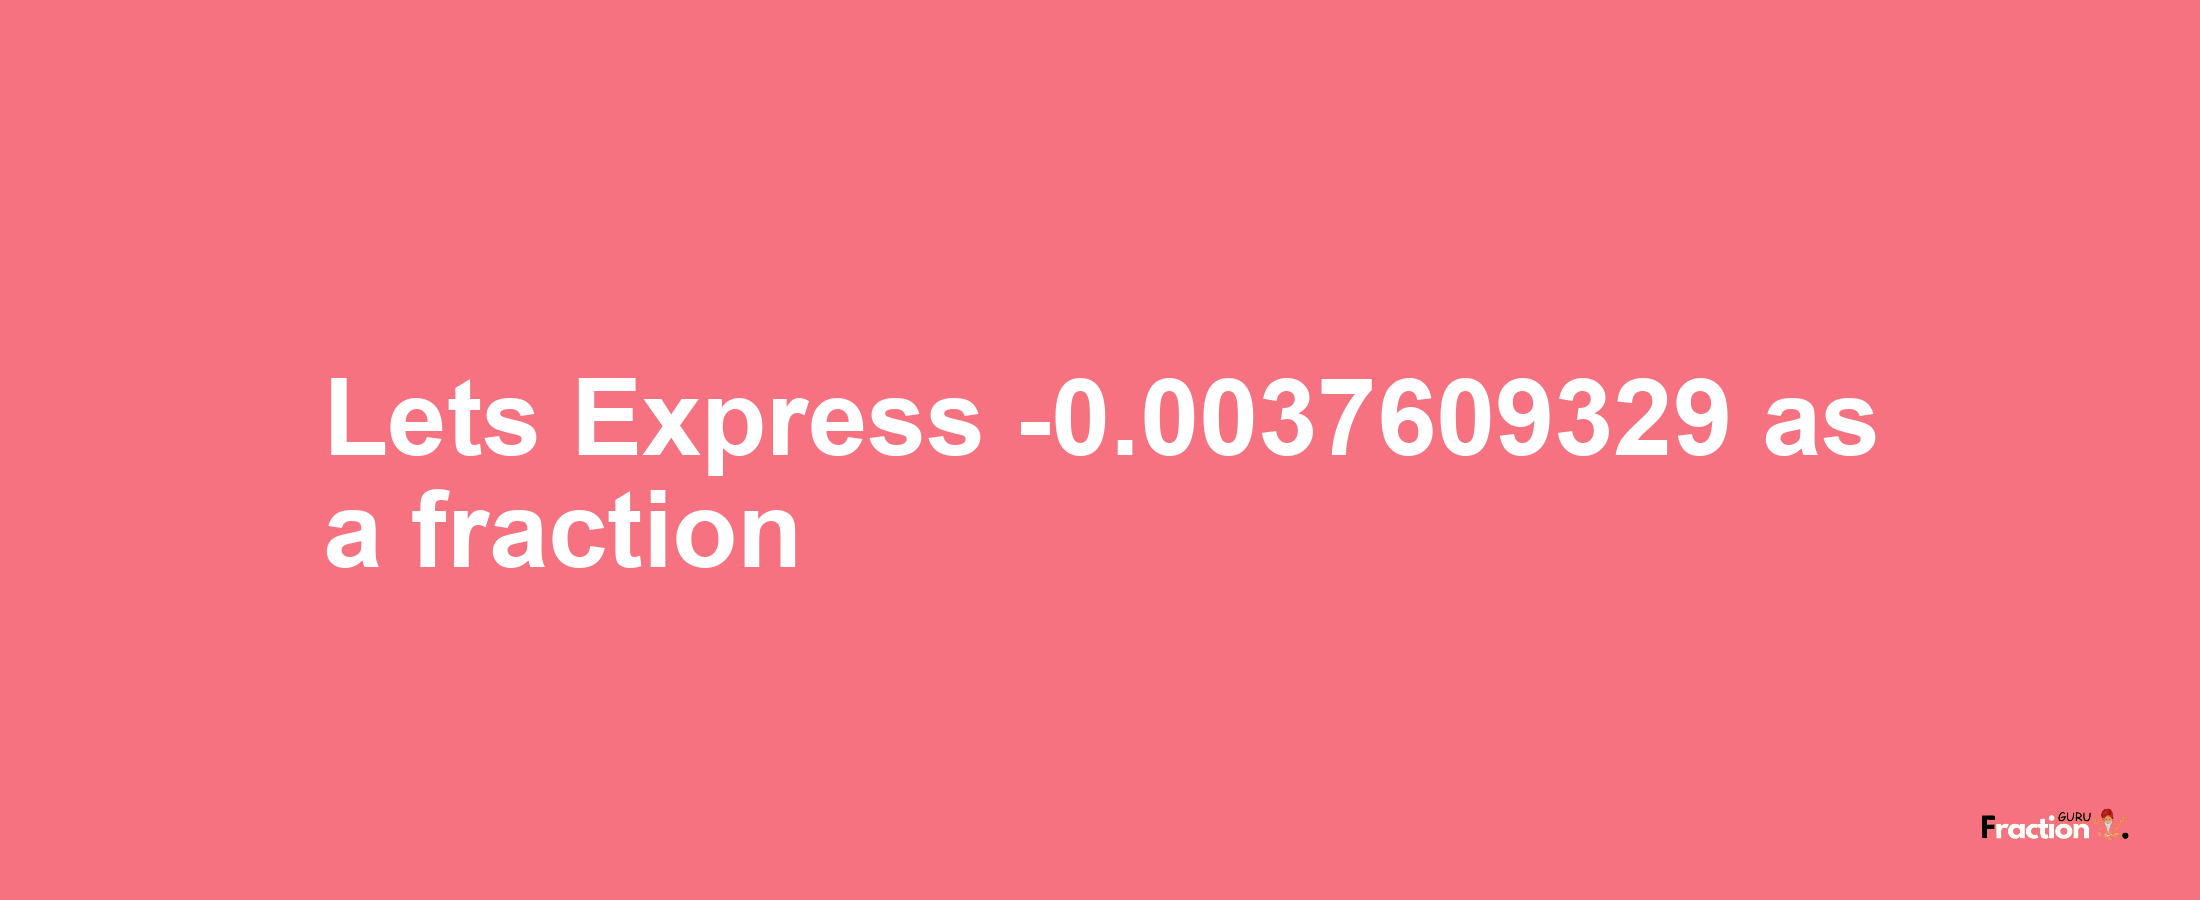 Lets Express -0.0037609329 as afraction